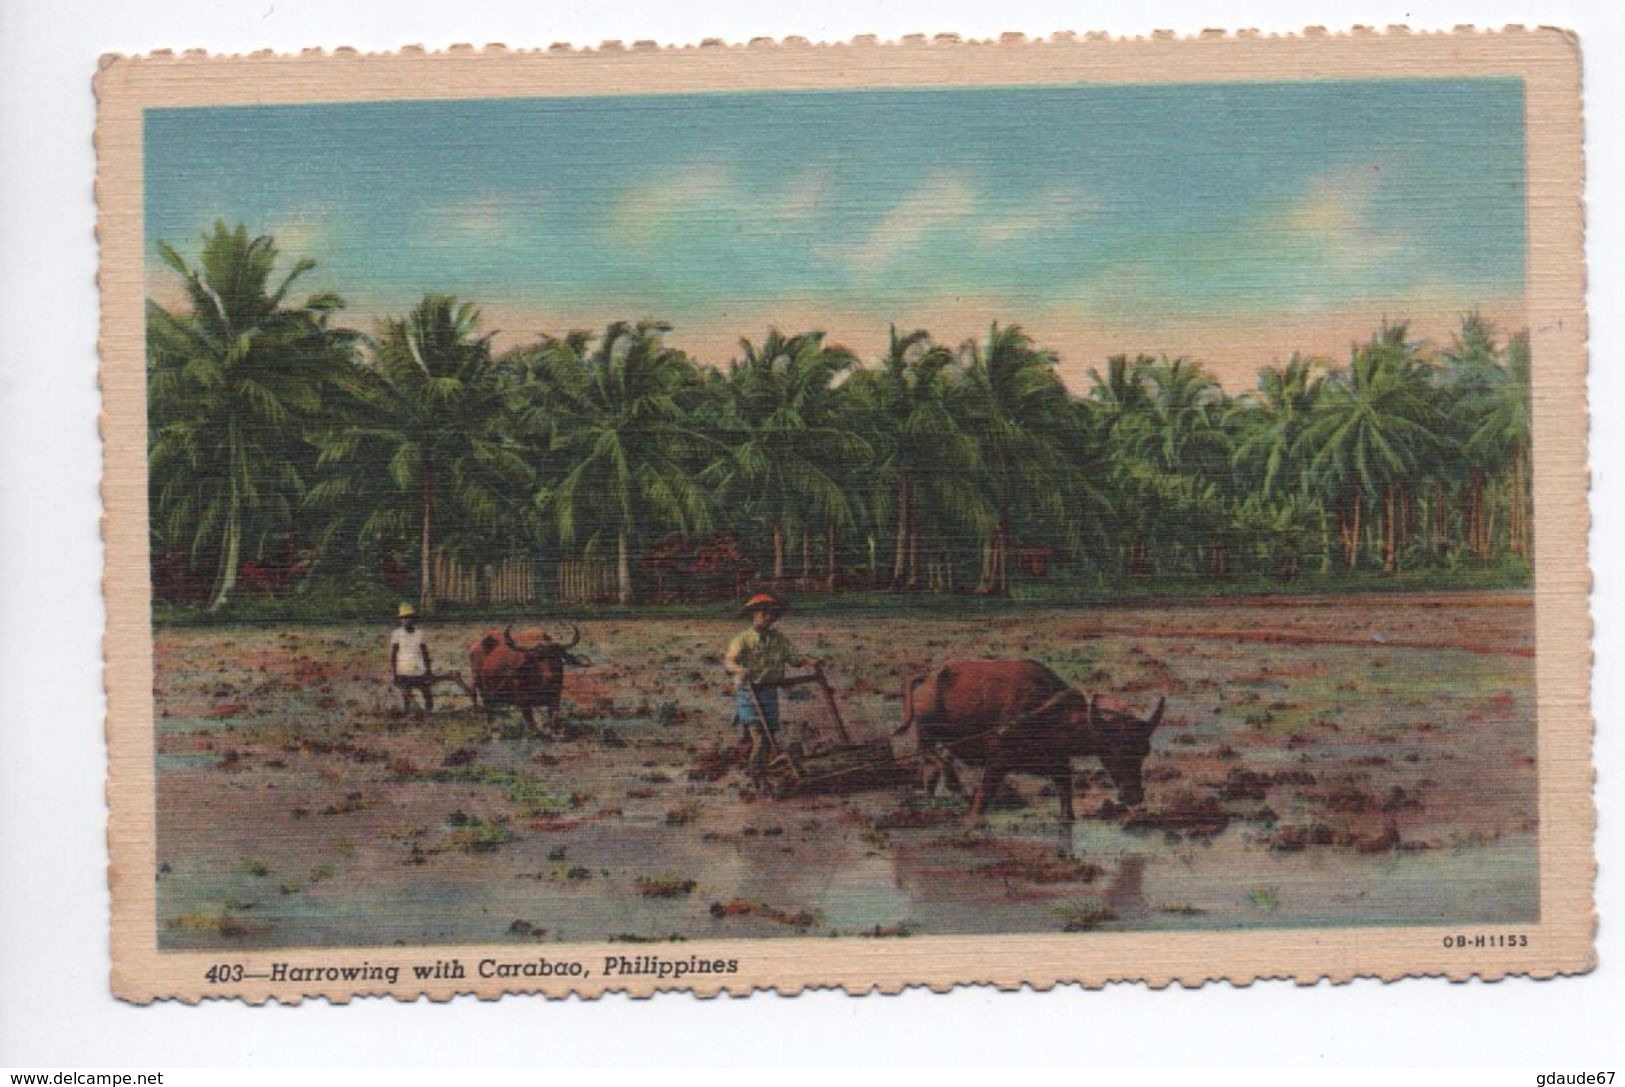 PHILIPPINES - HARROWING WITH CARABAO - AGRICULTURE - Filipinas